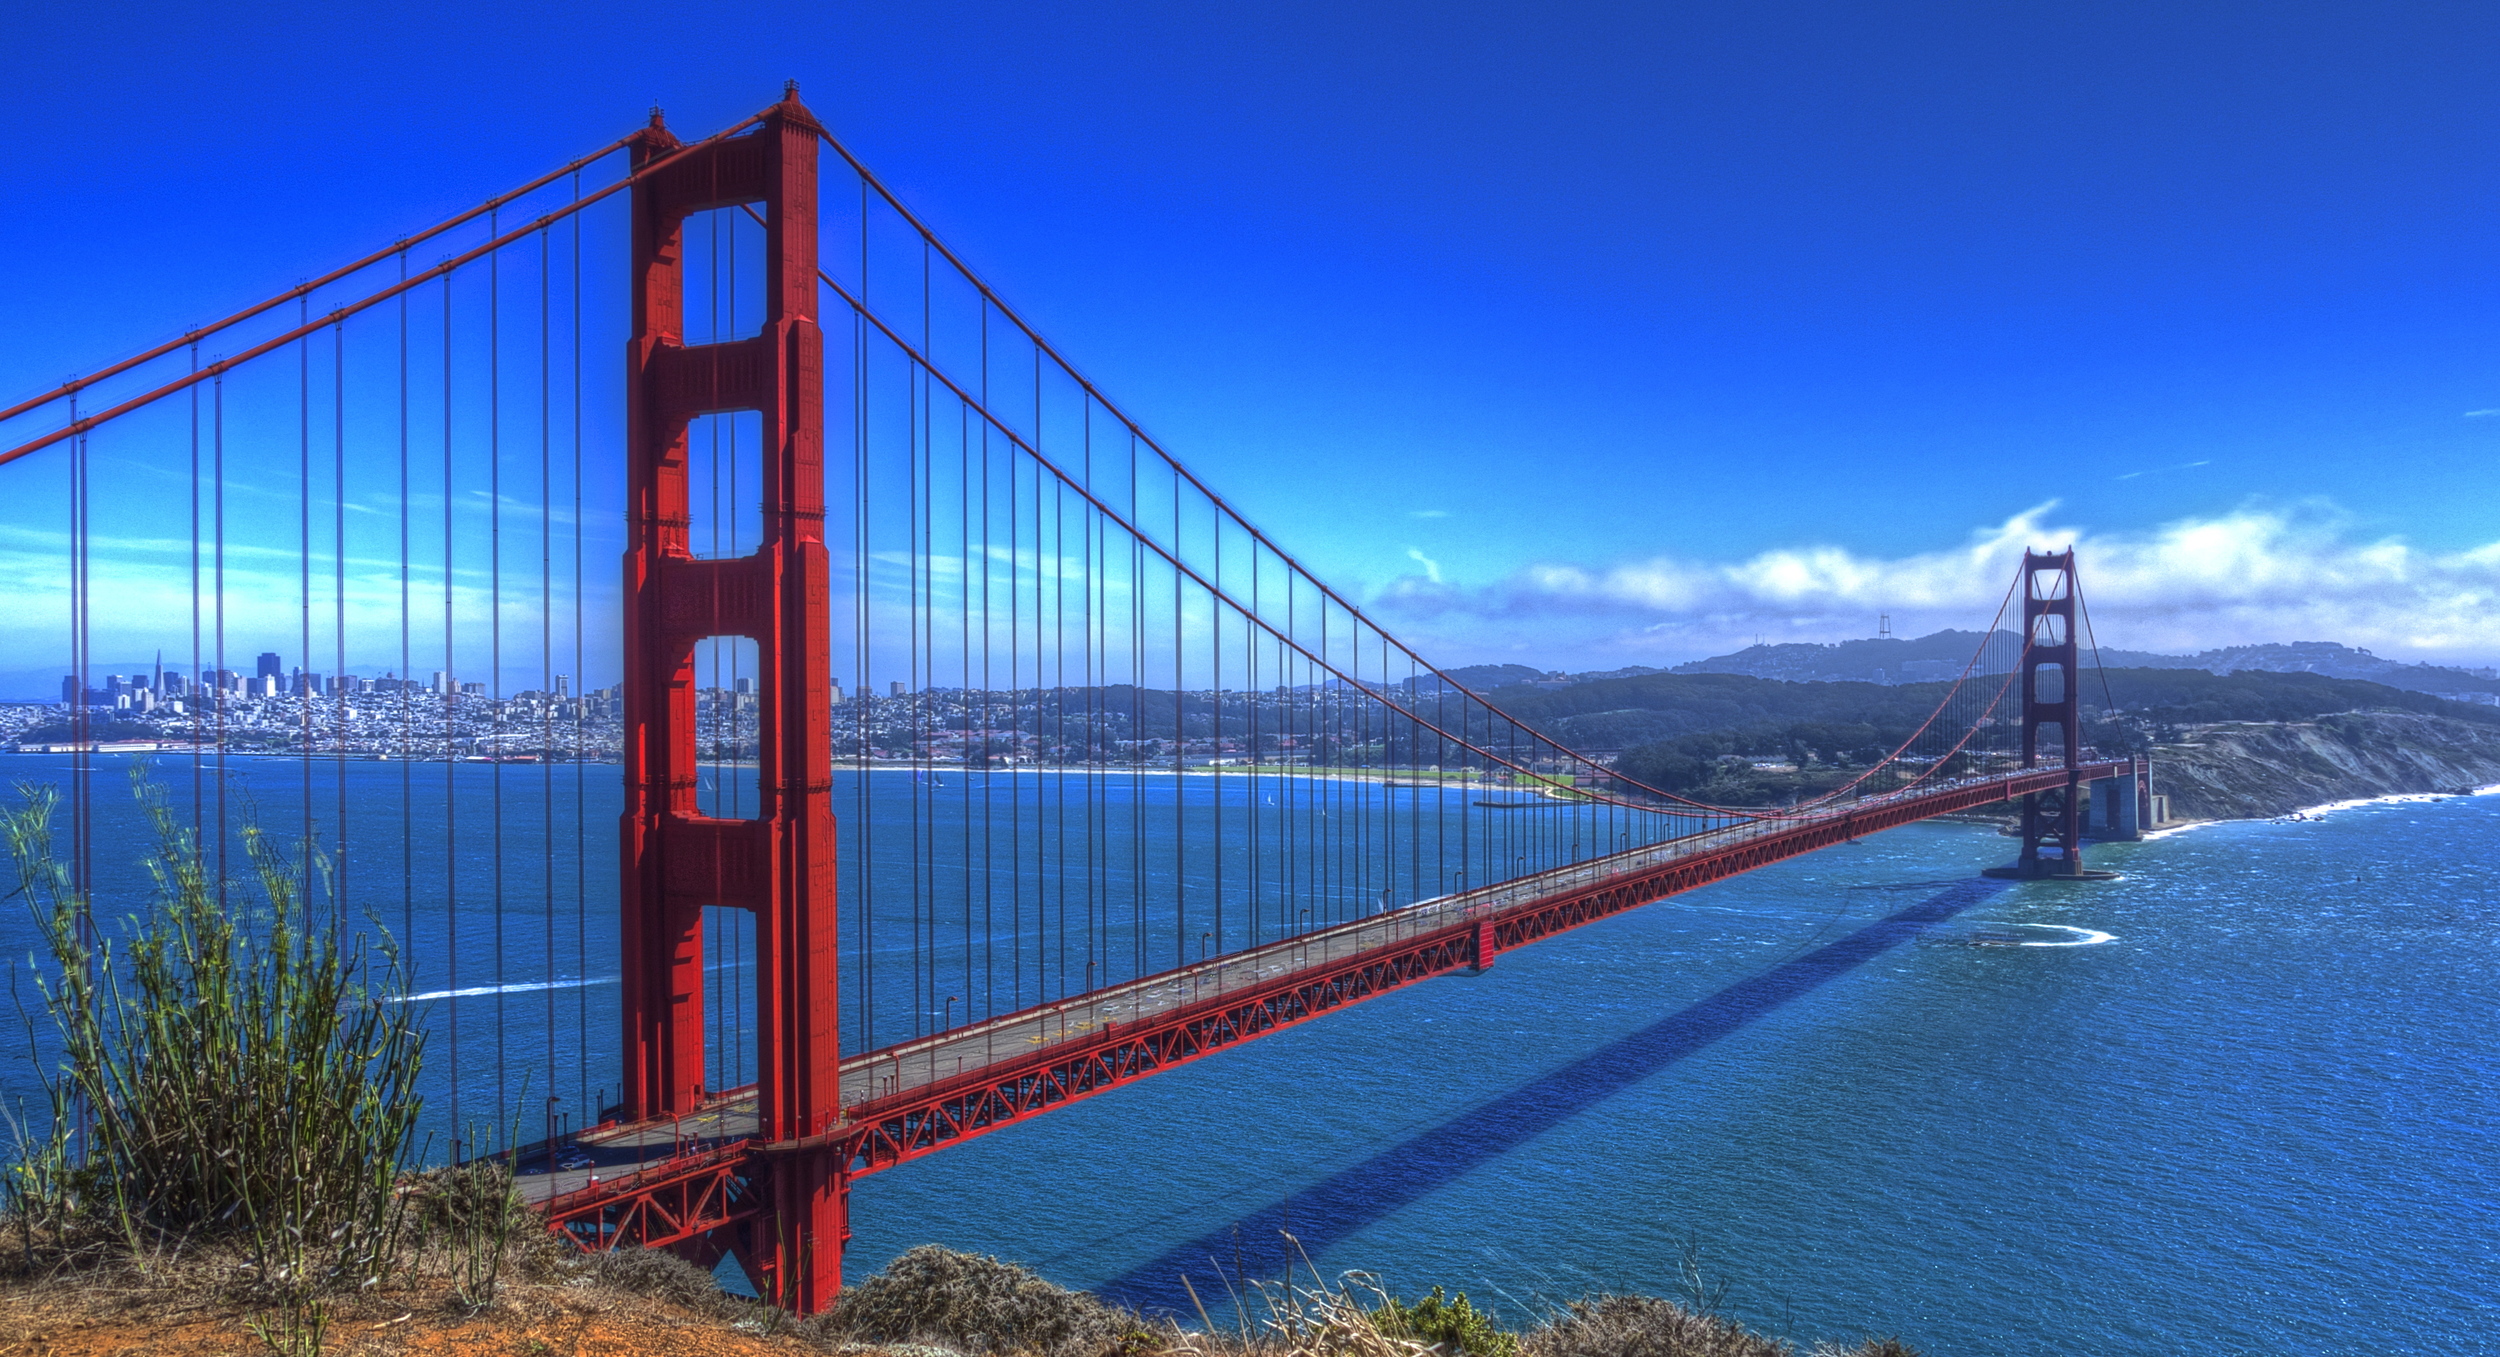 This Is My Photo Of The Golden Gate Bridge, There Are Many Like It But This One Is Mine